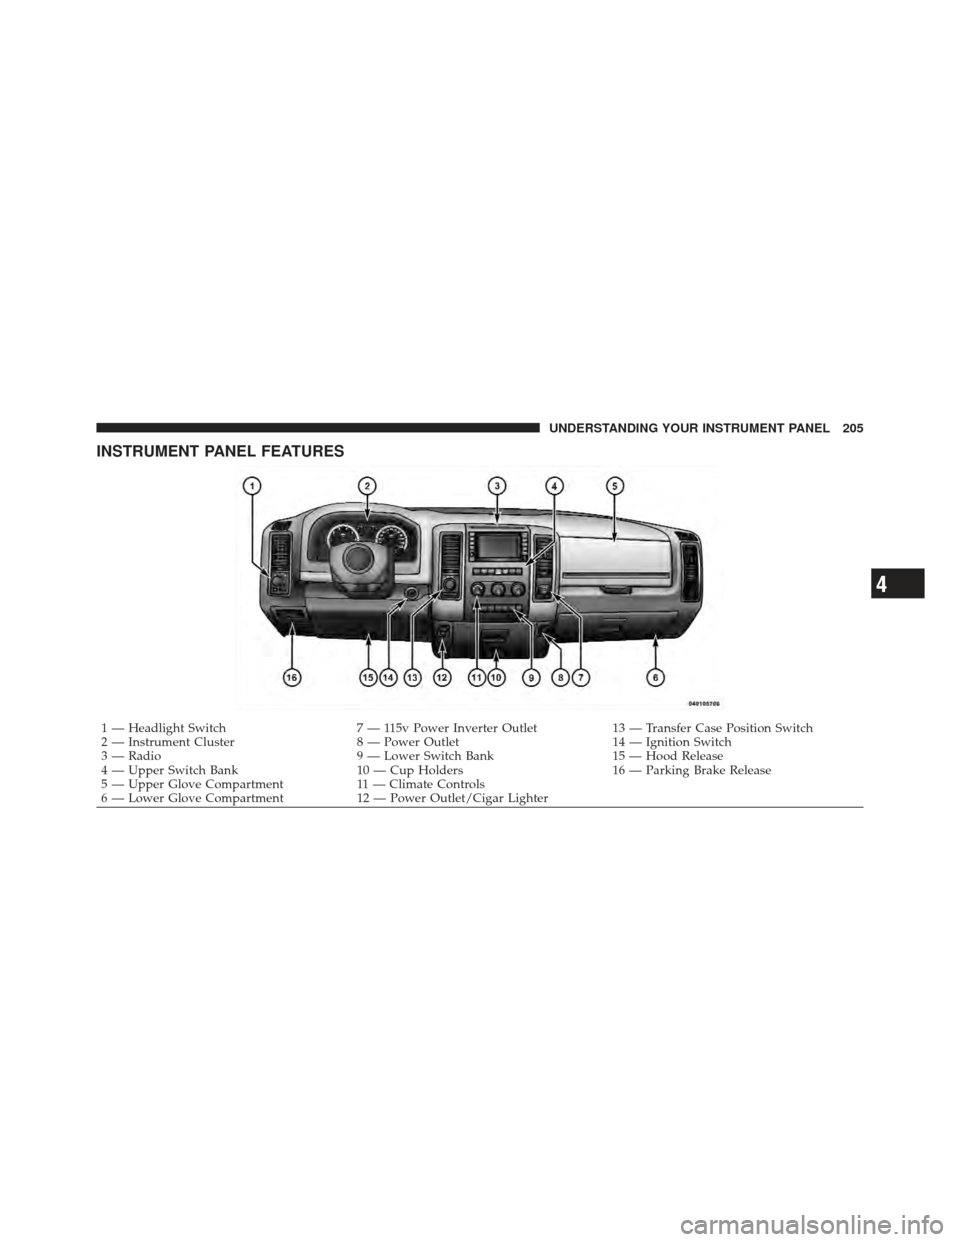 Ram 1500 2011  Owners Manual INSTRUMENT PANEL FEATURES
1 — Headlight Switch7 — 115v Power Inverter Outlet13 — Transfer Case Position Switch
2 — Instrument Cluster 8 — Power Outlet14 — Ignition Switch
3 — Radio 9 —